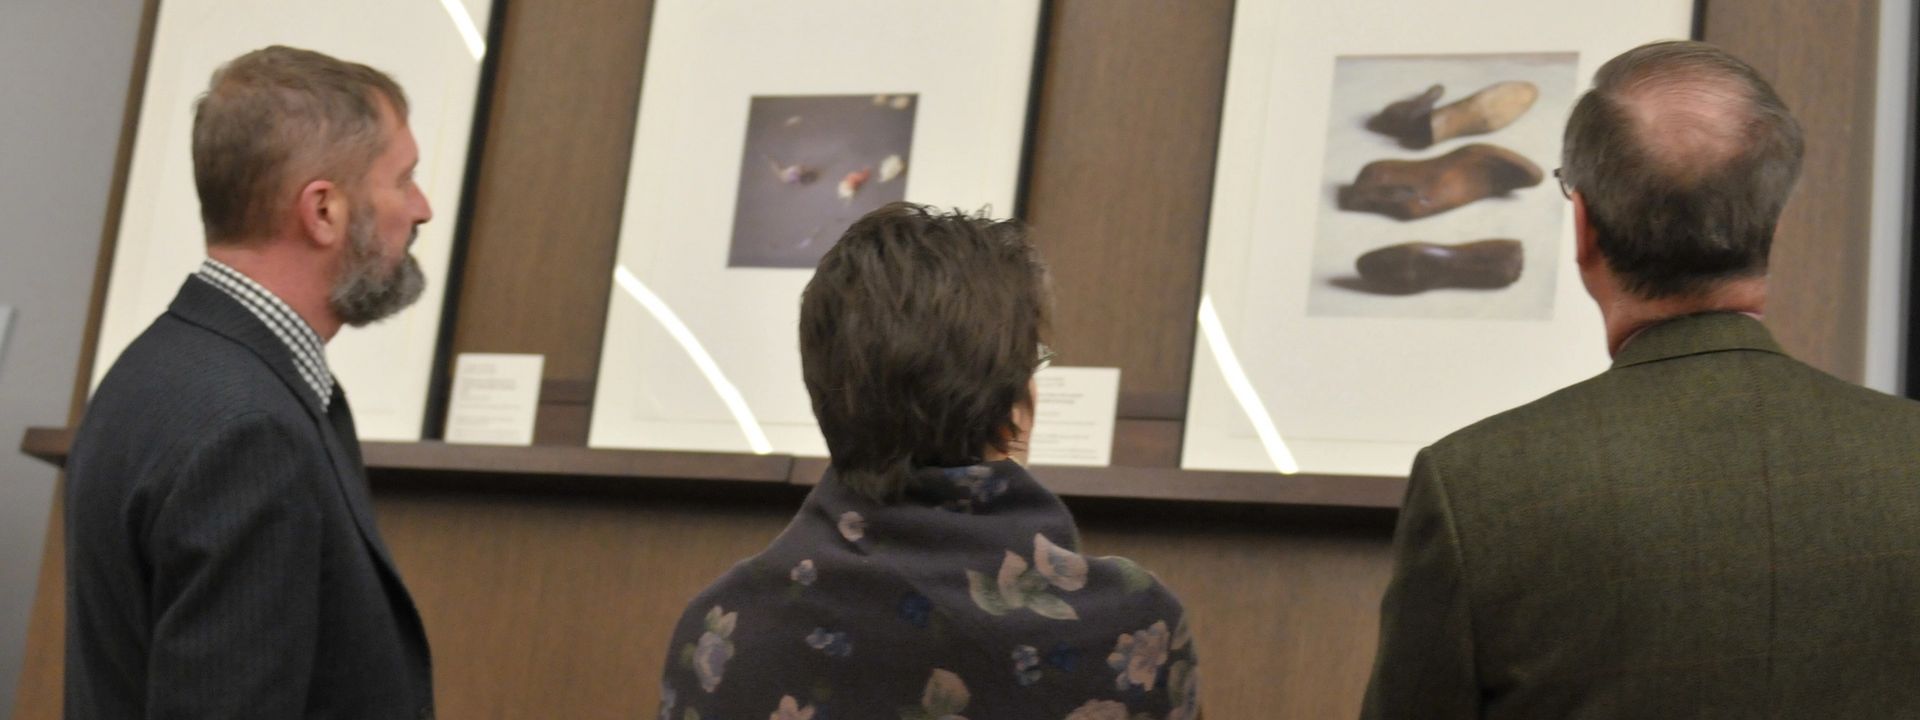 The backs of three people looking at large printed photographs